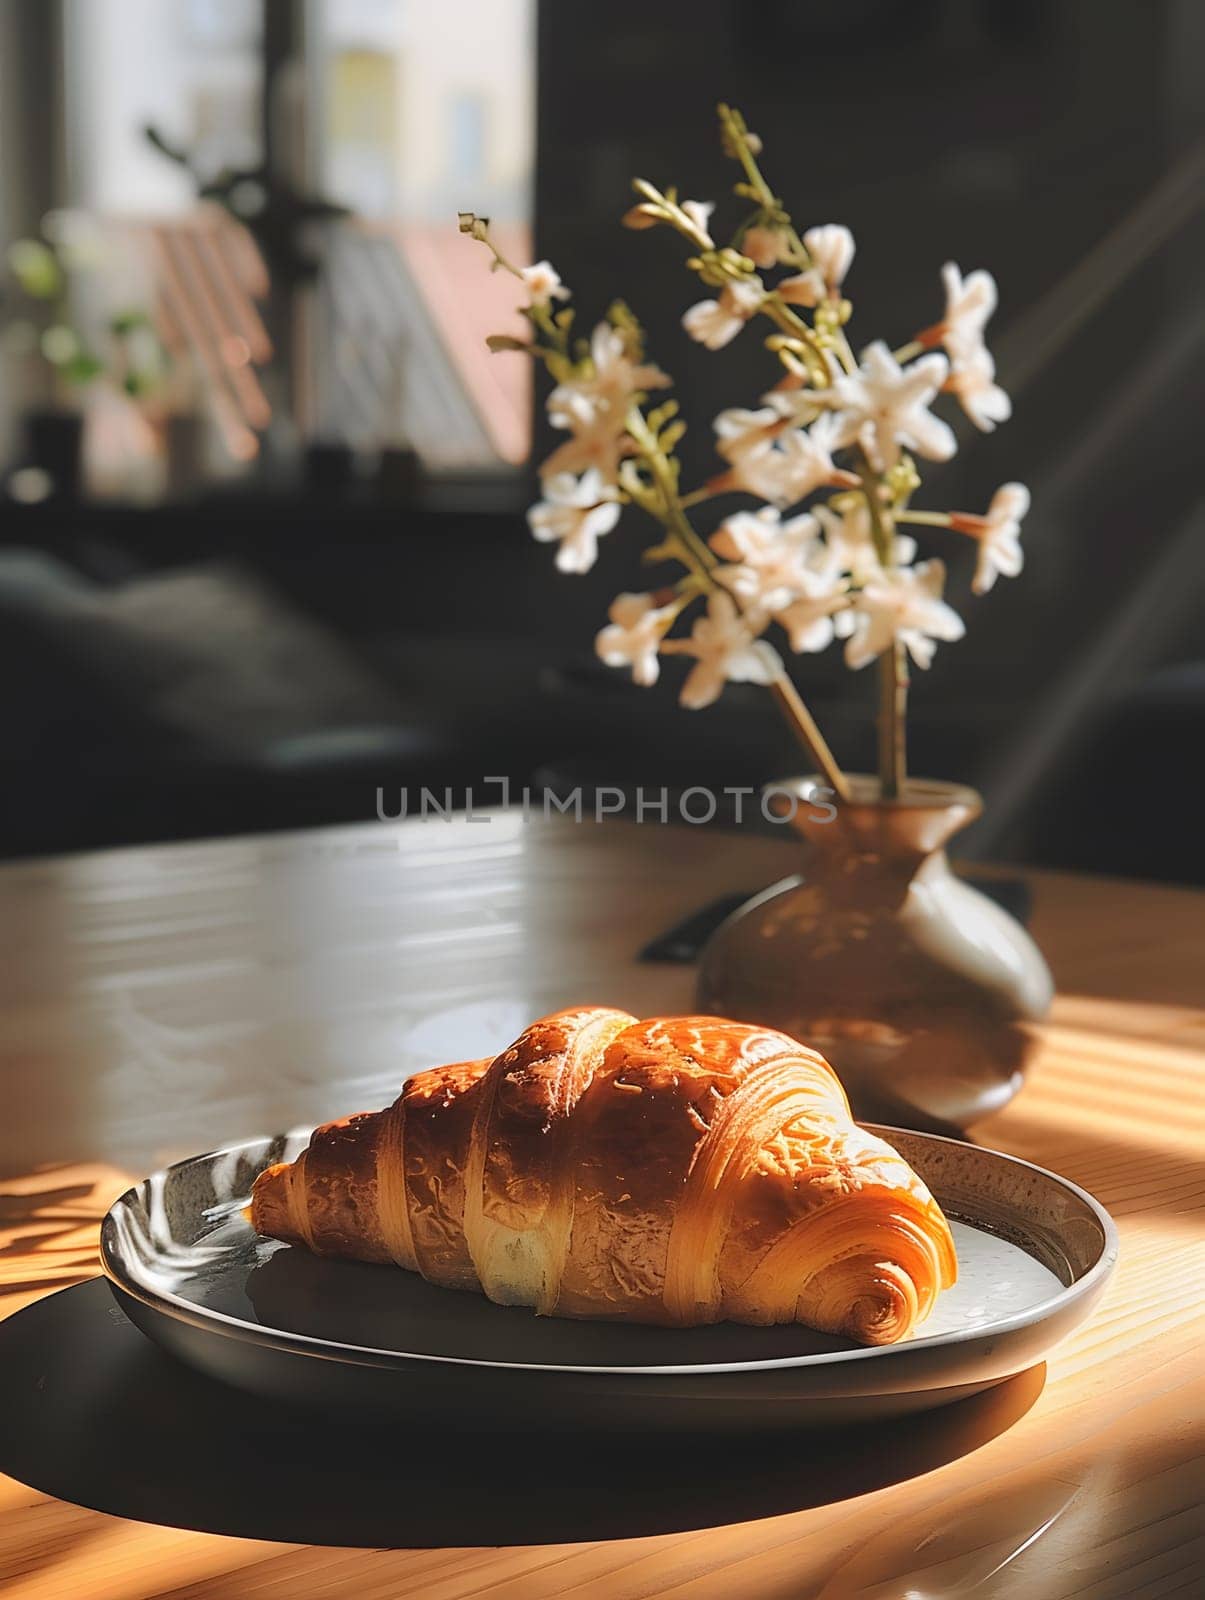 A croissant sits on a plate next to a vase of flowers on the table by Nadtochiy